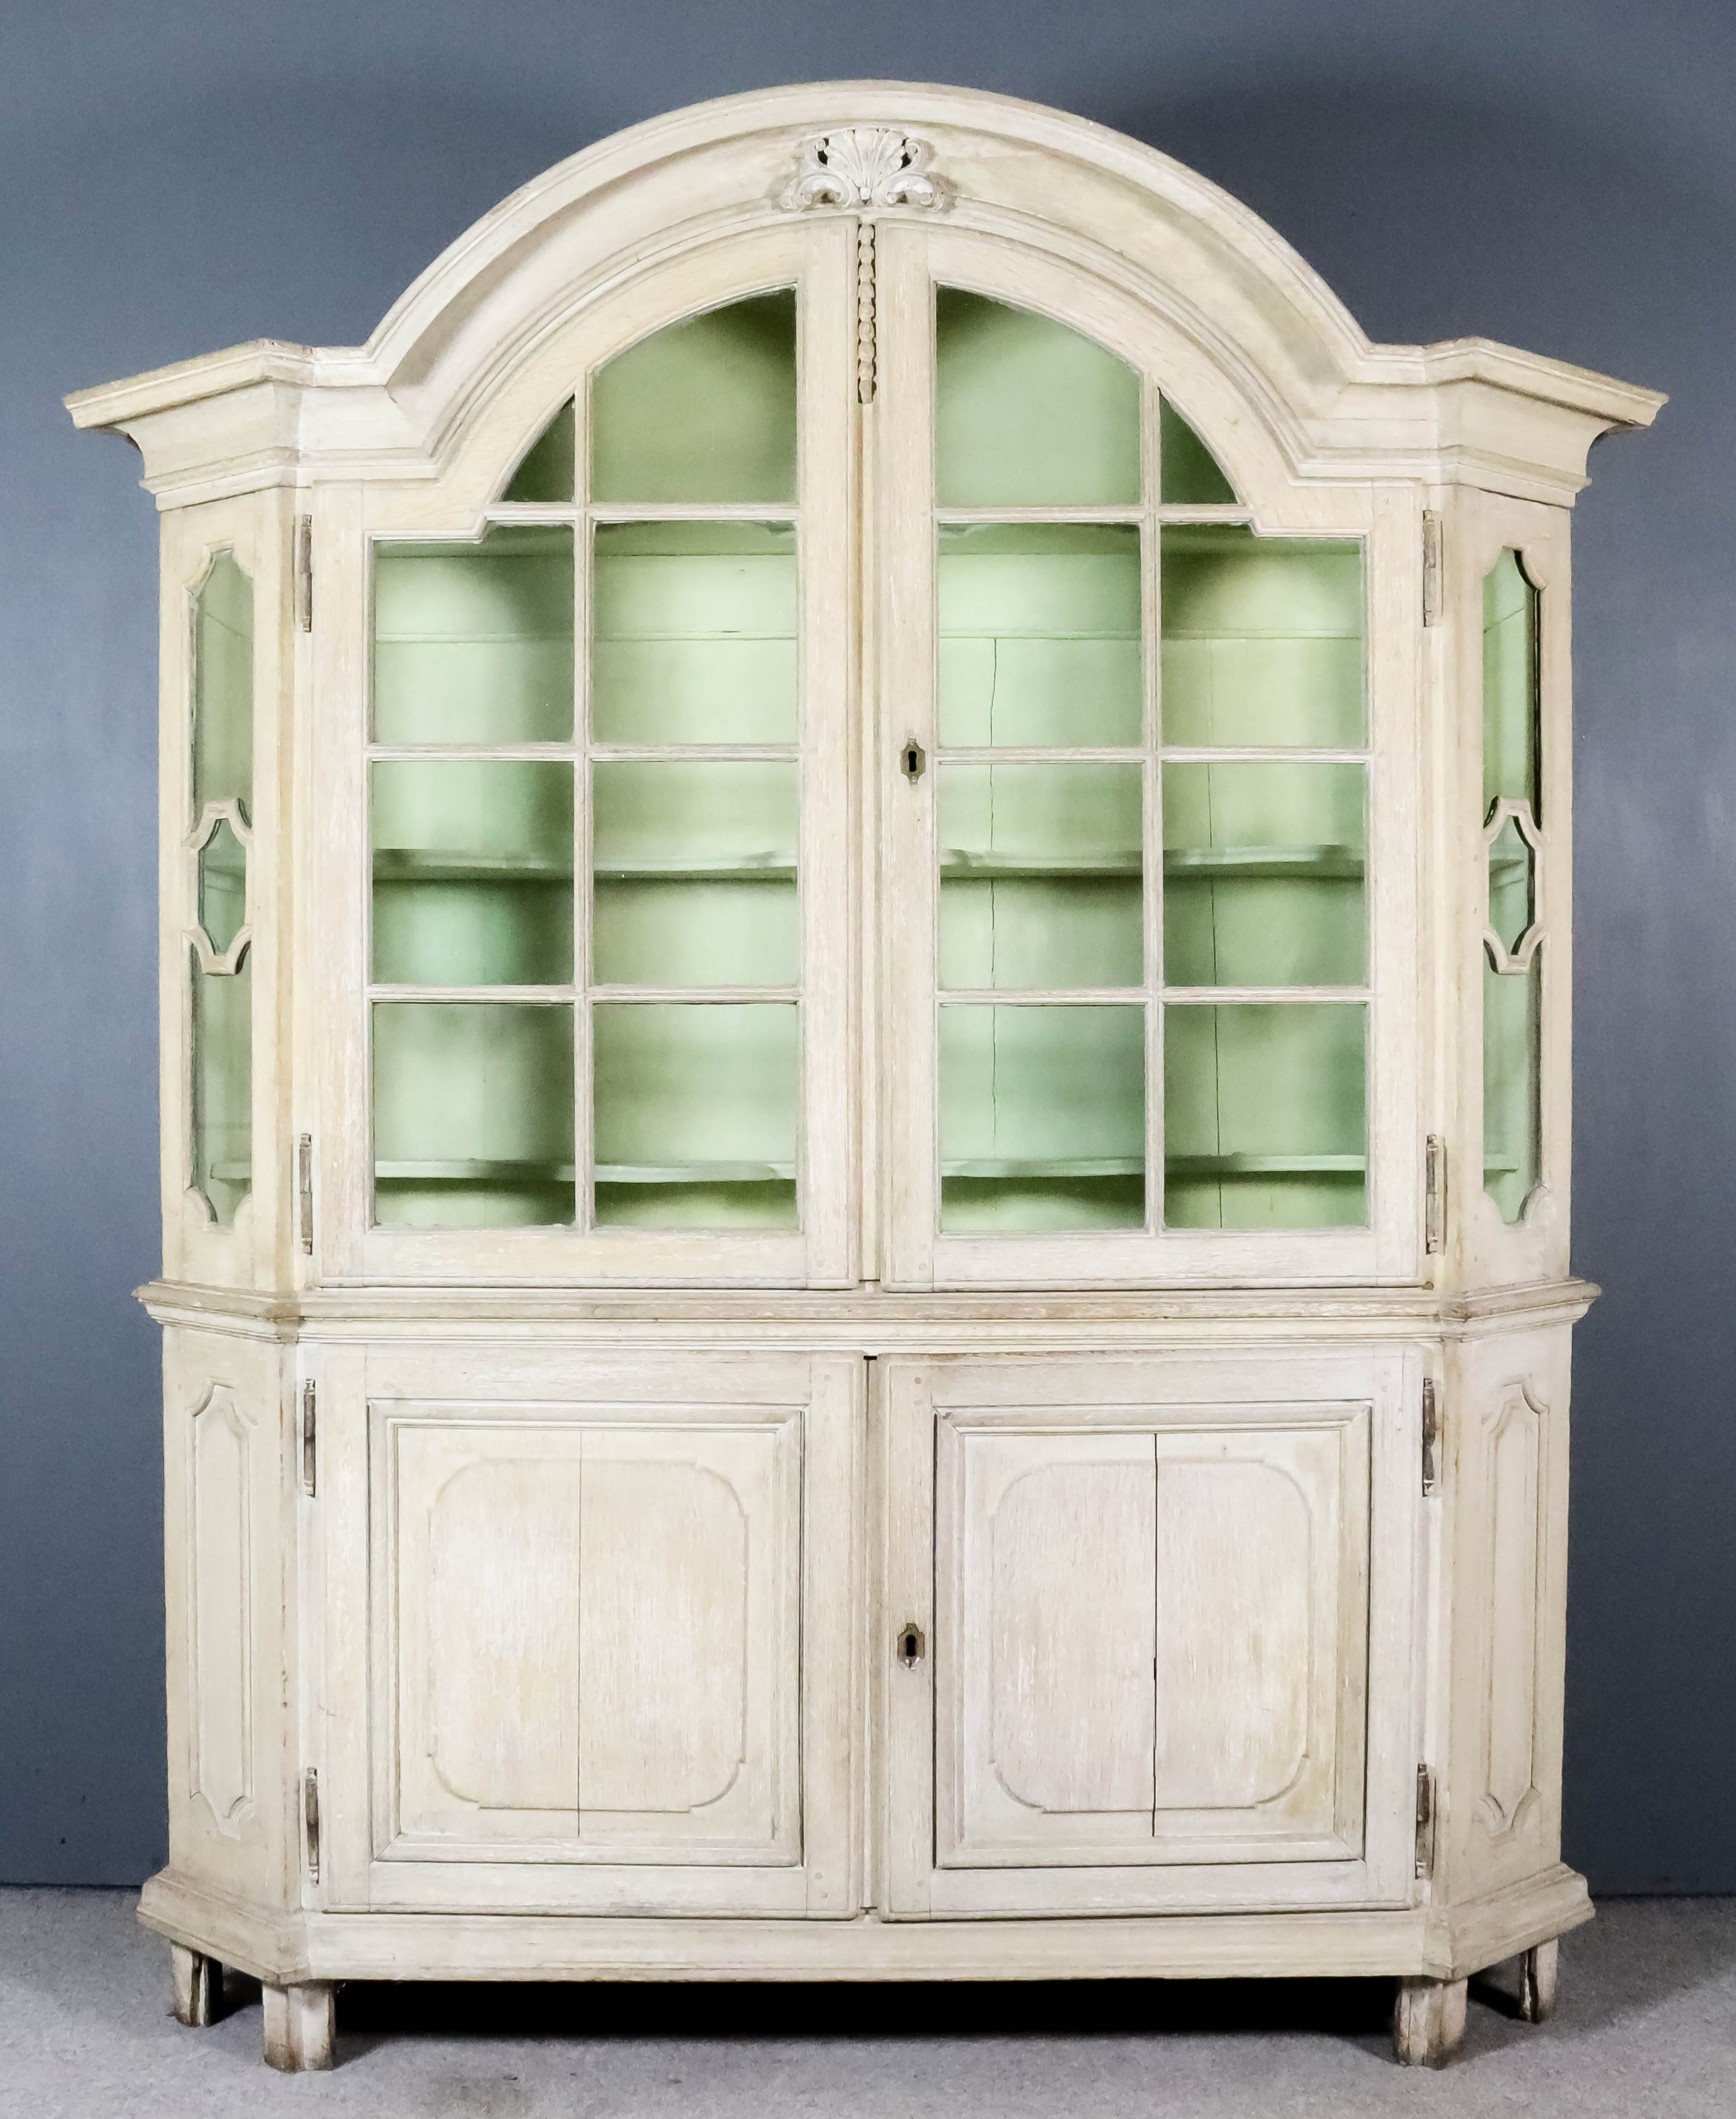 A 19th Century Dutch Panelled Limed Oak Display Armoire of "17th/18th Century" Design, the upper